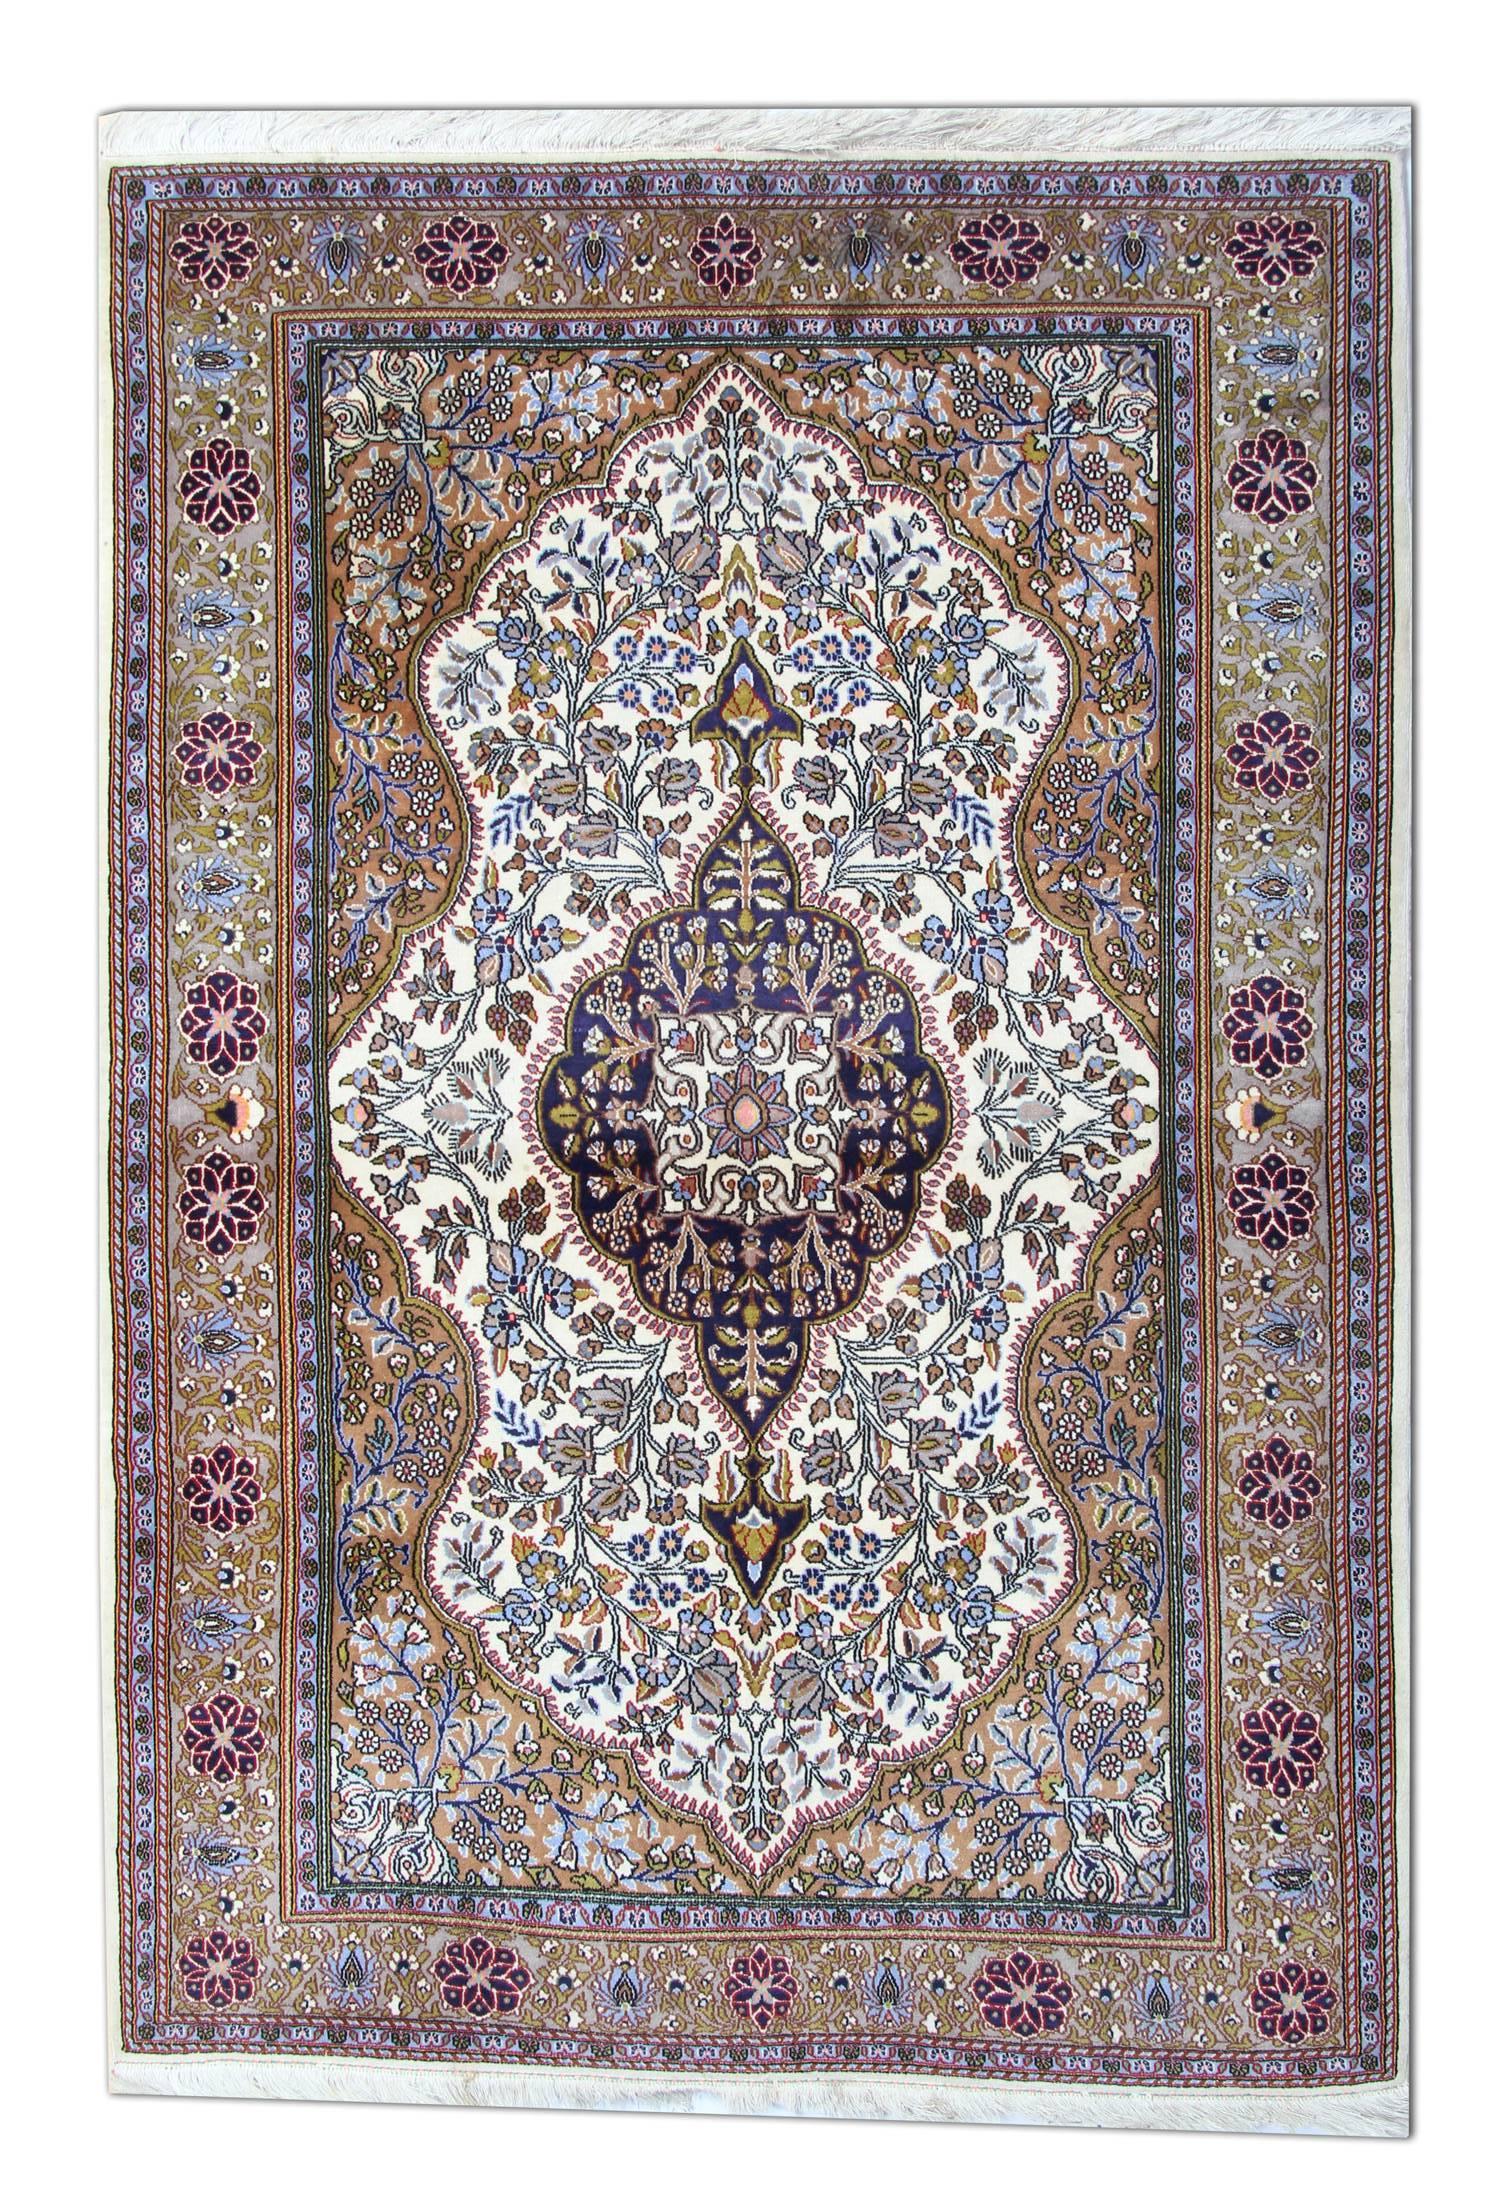 Easily style this marvellous wool rug in any room and create an instant accent piece. Woven by hand with a statement central medallion and highly detailed, floral surround design. The unique colour palette includes accents of mustard, brown, purple